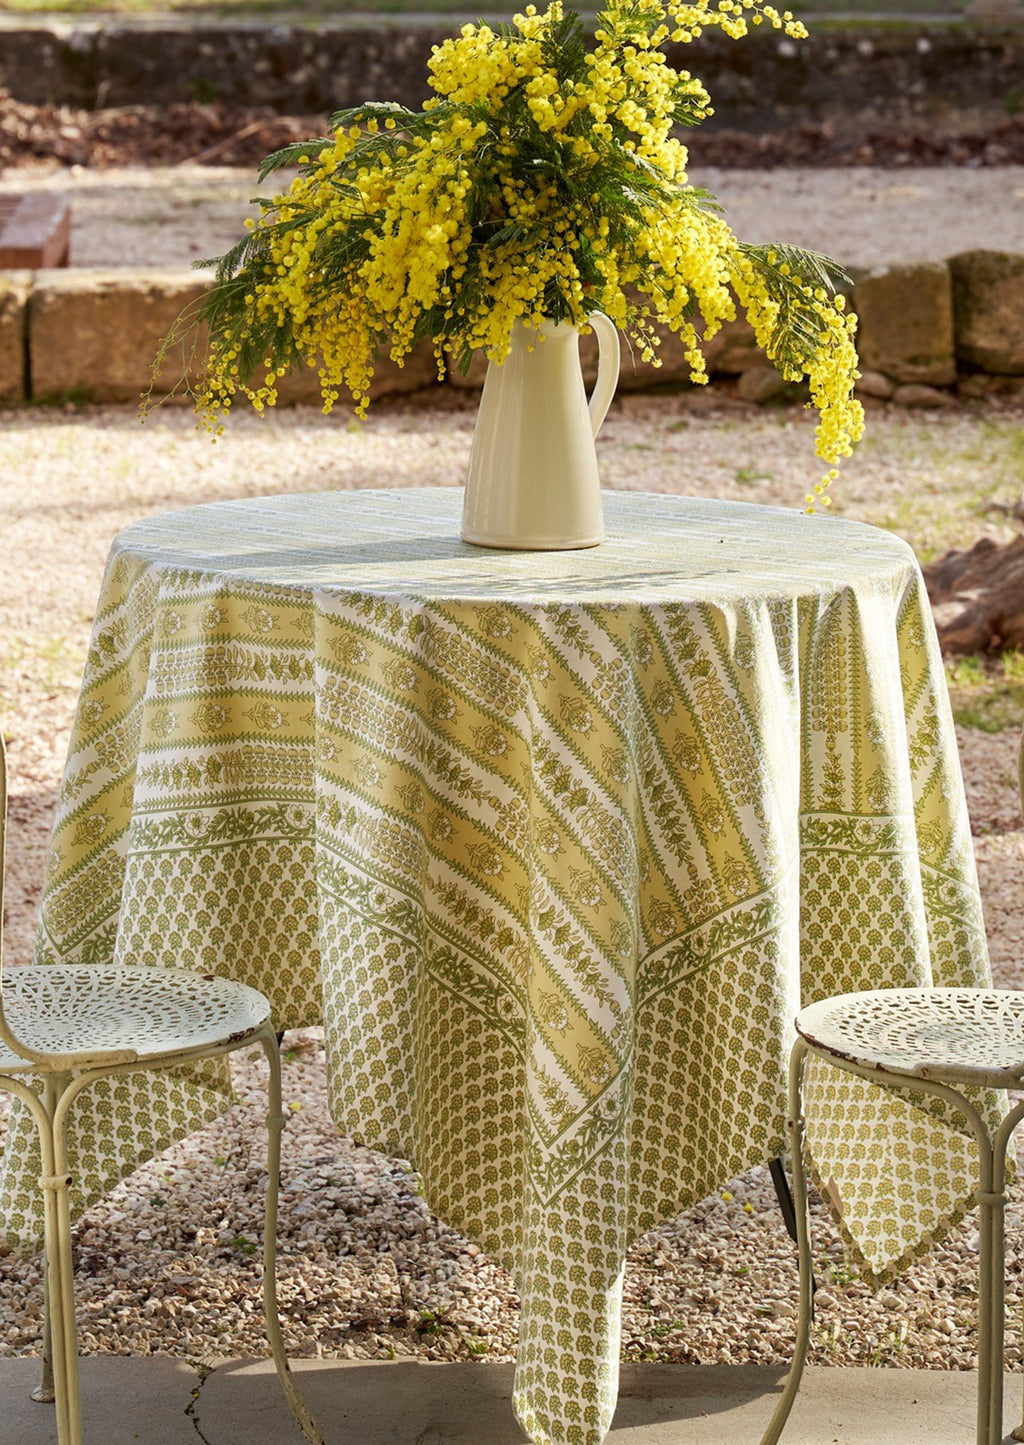 1: A block printed botanical patterned tablecloth in pastel yellow and green tones.